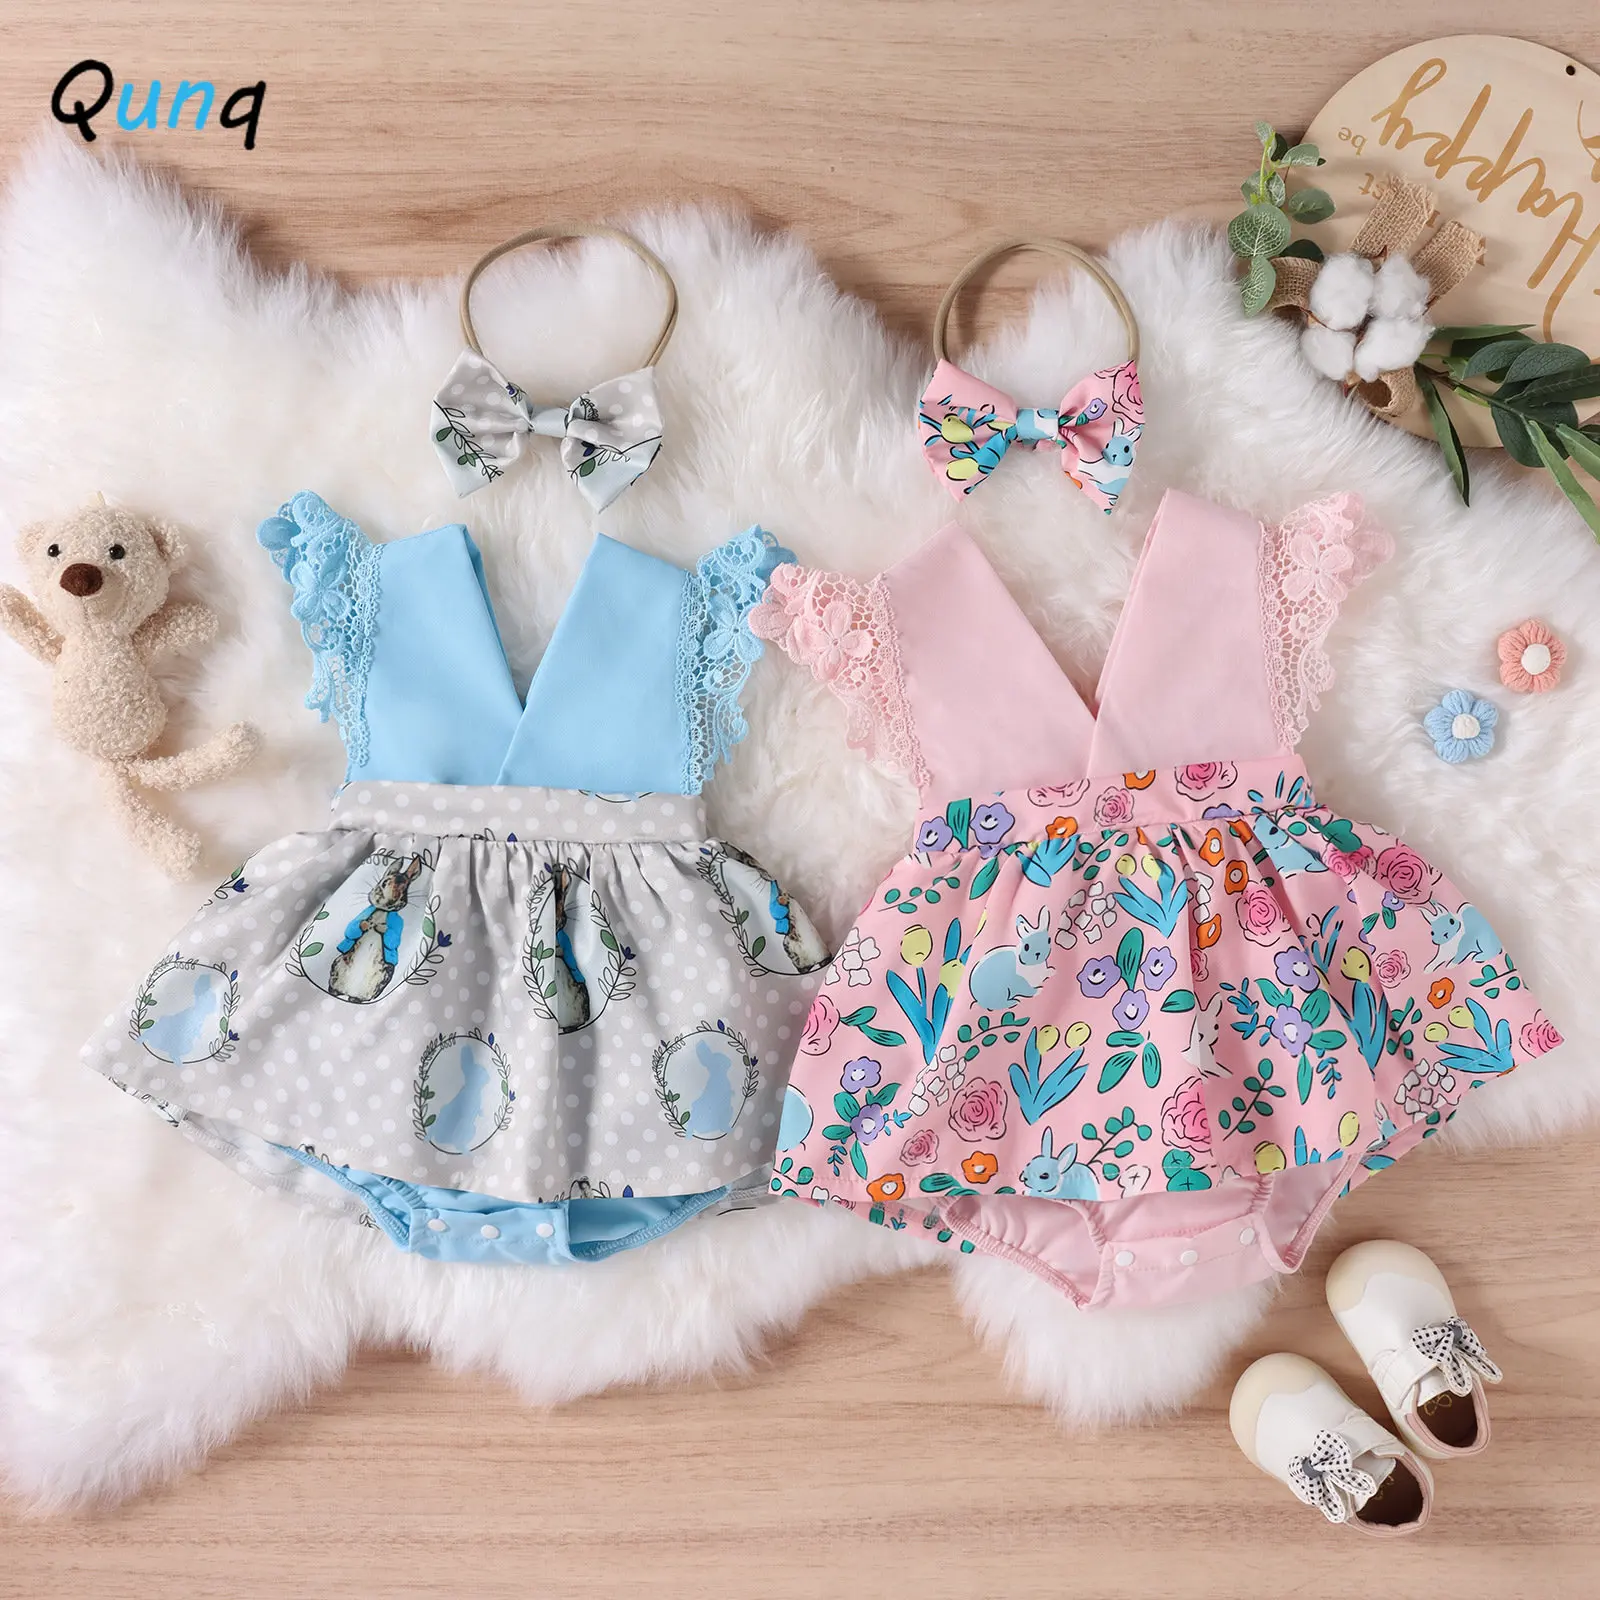 

Qunq Spring Summer New Girls Sweet Princess Flying Sleeve Lovely Print Baby Dress And Headband Casual Kids Clothes Age 3T-8T